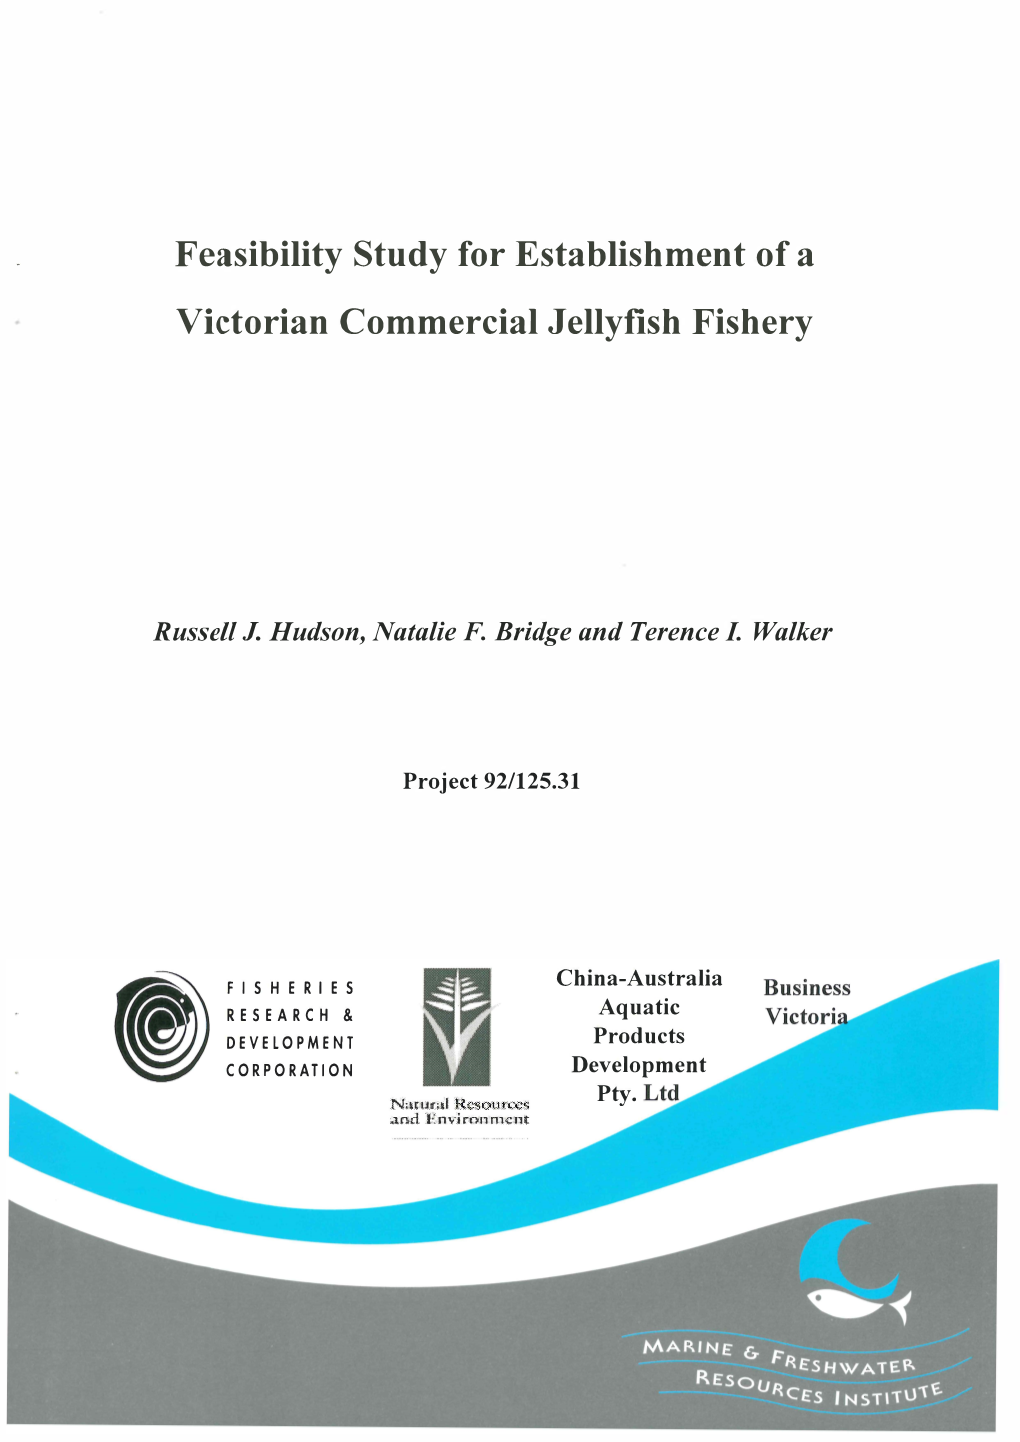 Feasibility Study for Establishment of a Victorian Commercial Jellyfish